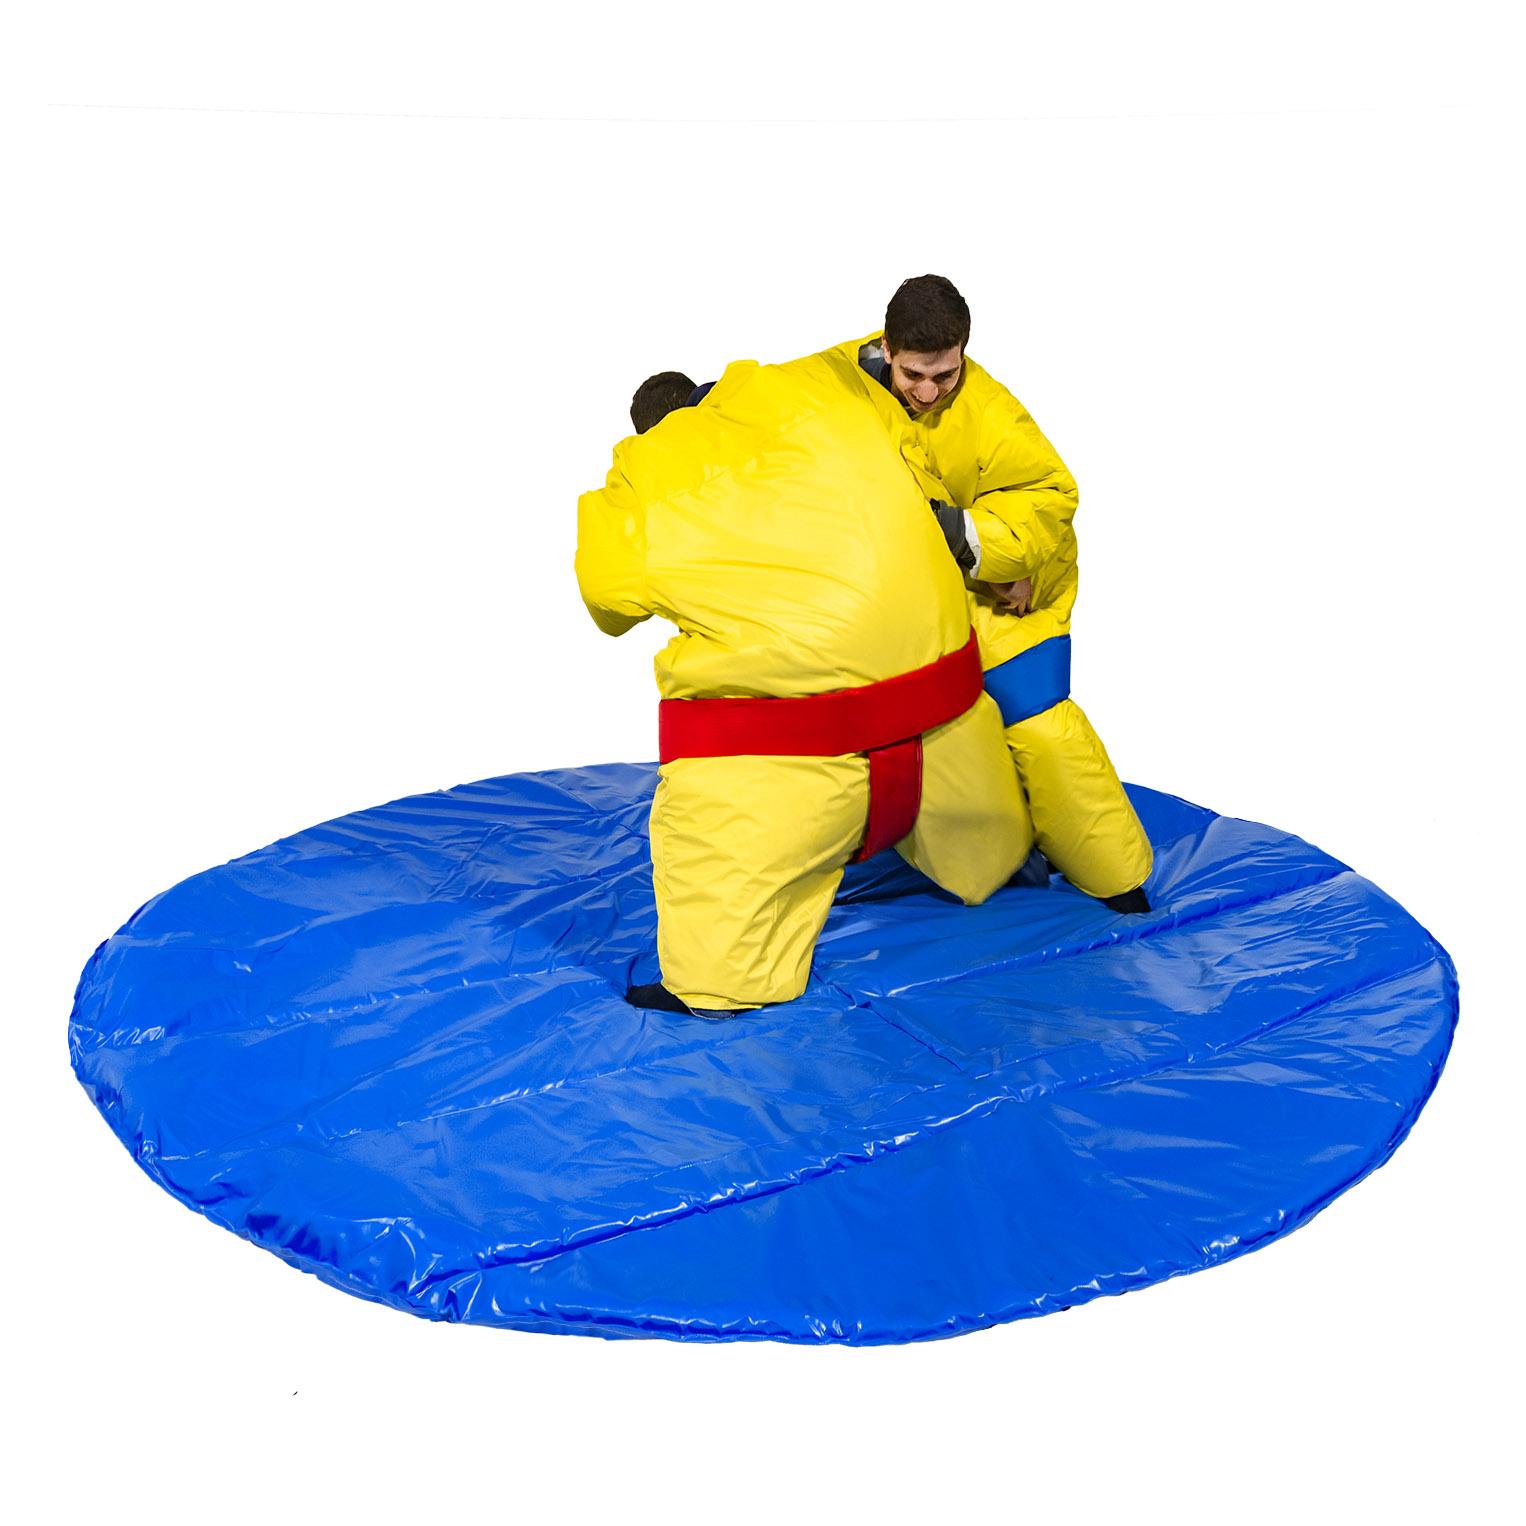 Kids 2 x Sumo Suits with Helmet and Game Carpet